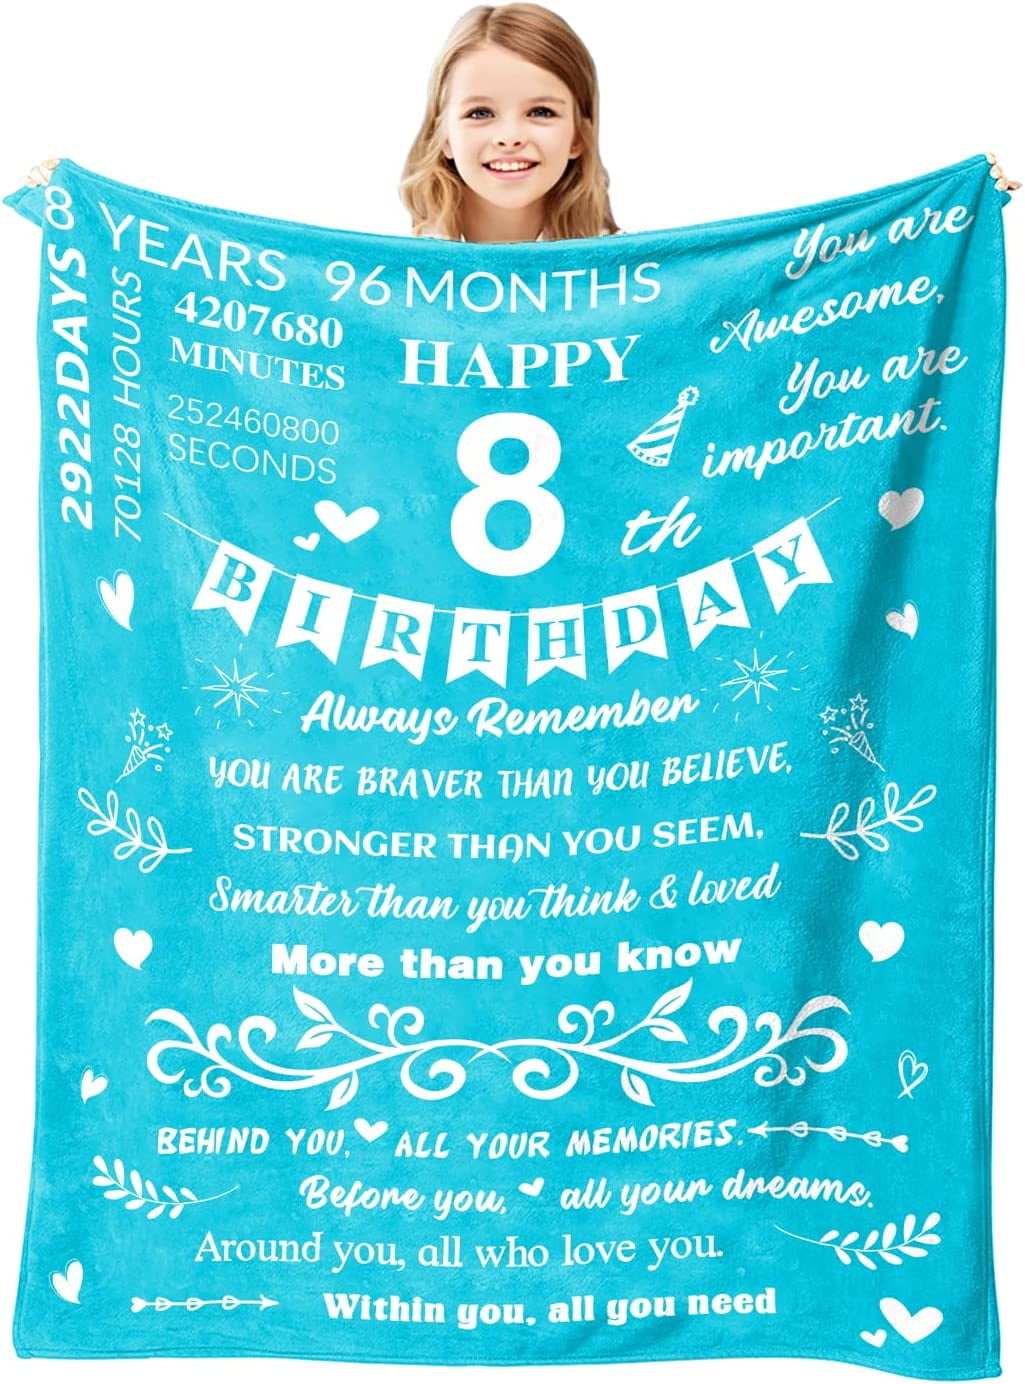 Losuites Blanket Gift for 9 Year Old Girl-9 Year Old Girl Gifts,Birthday  Gifts for 9 Year Old Girls-9th Birthday Decorations for Girl,Best Gifts for  9